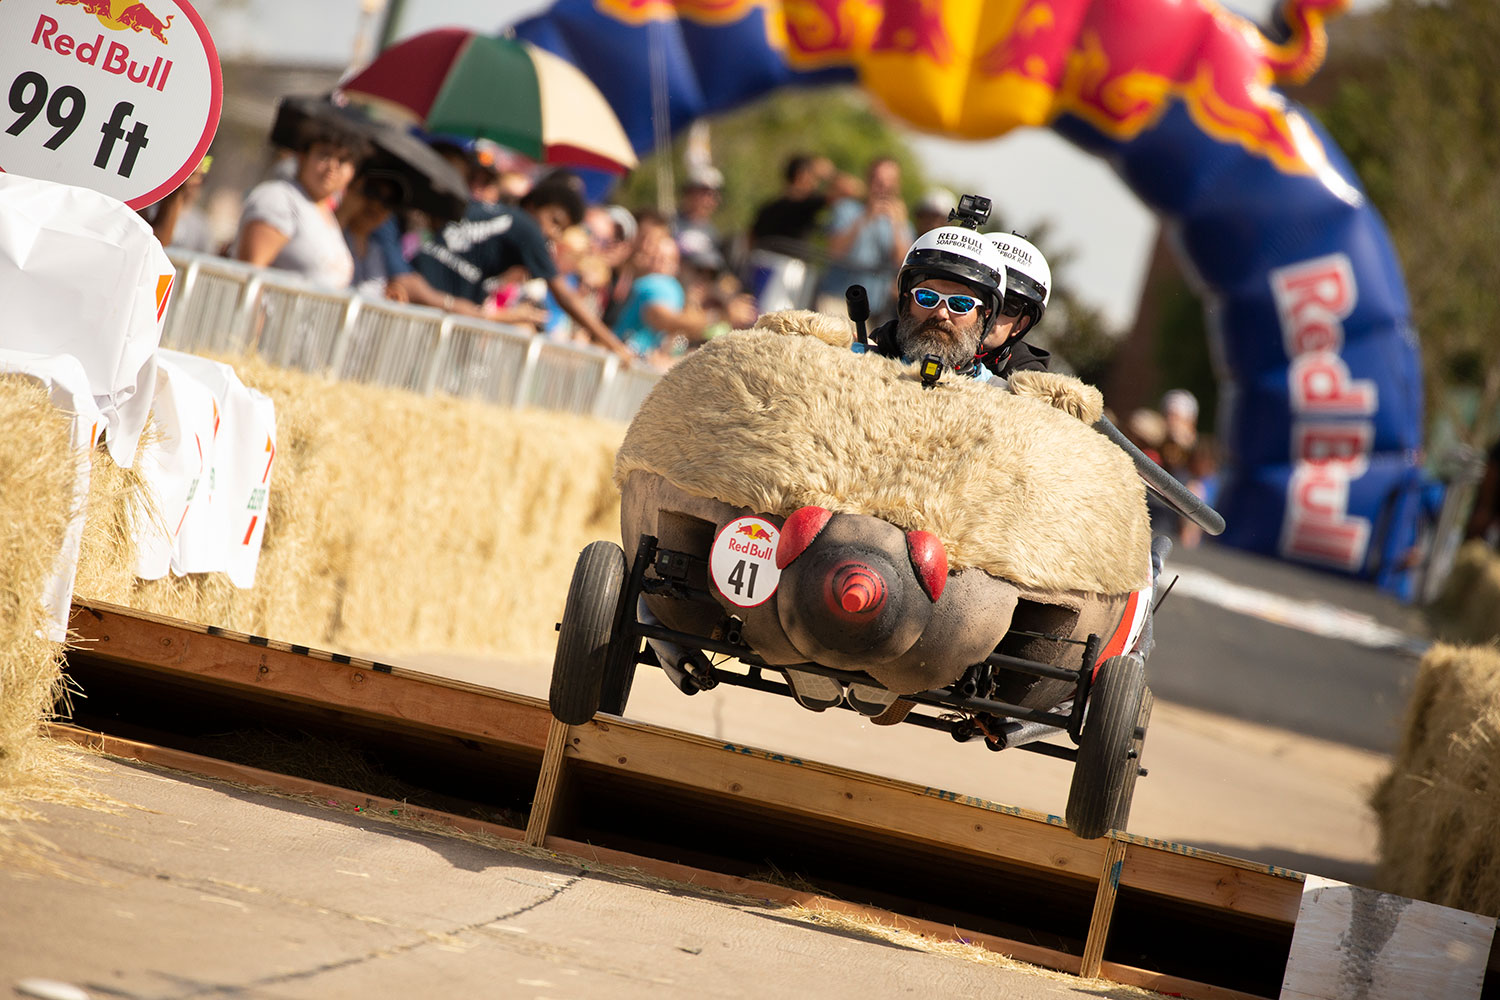 2019 Red Bull Soapbox Race Comes to DFW Plano Magazine